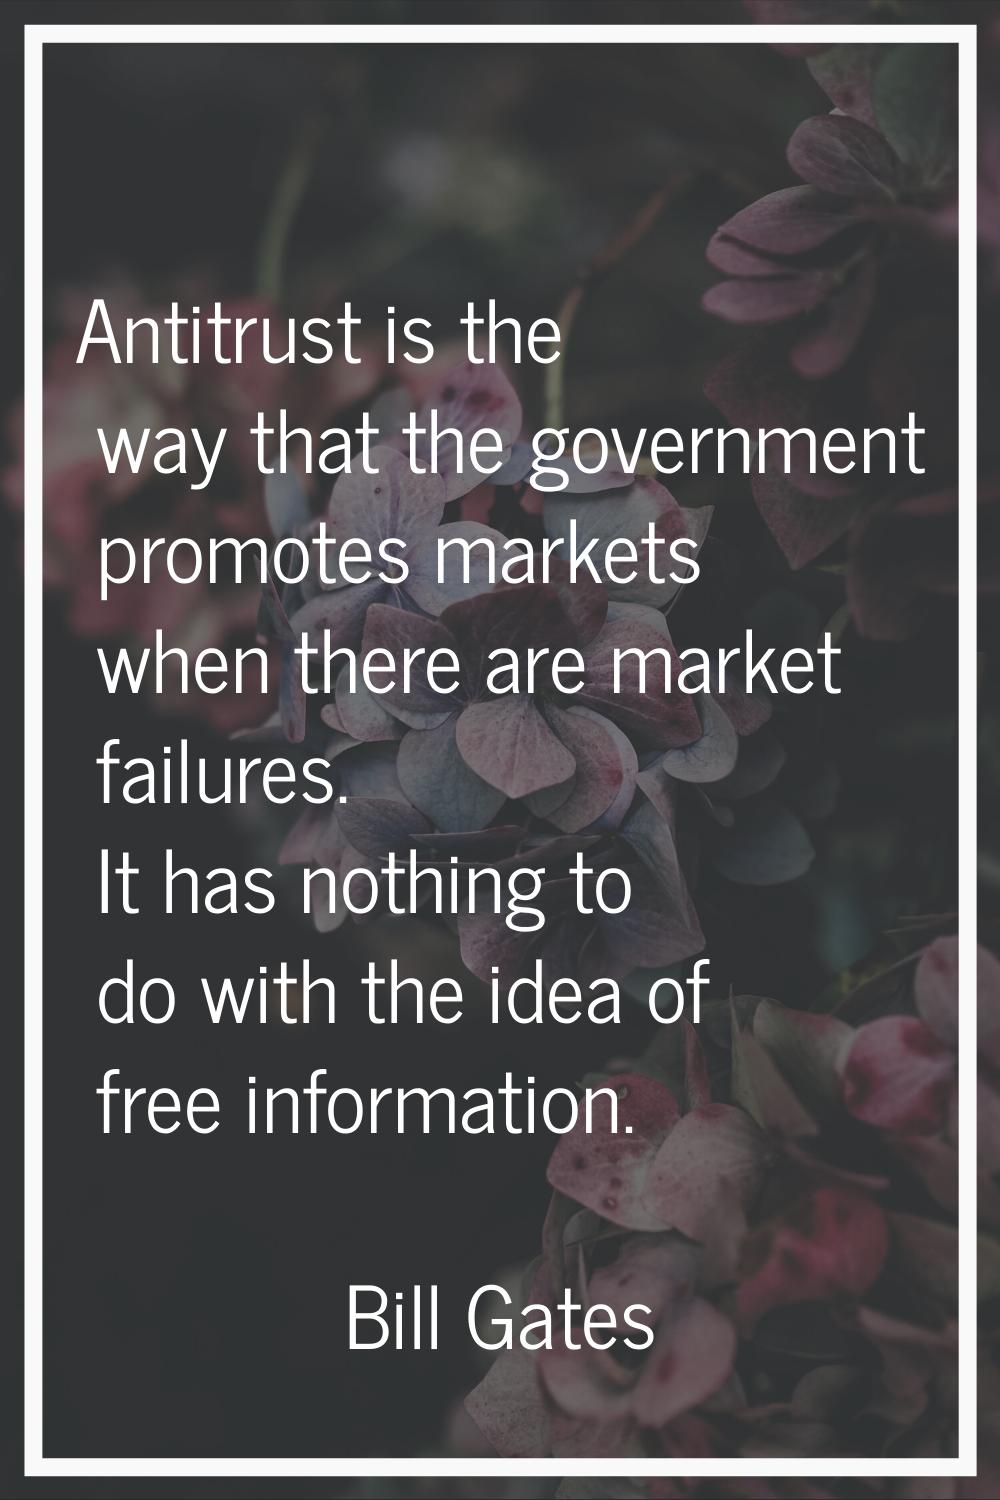 Antitrust is the way that the government promotes markets when there are market failures. It has no